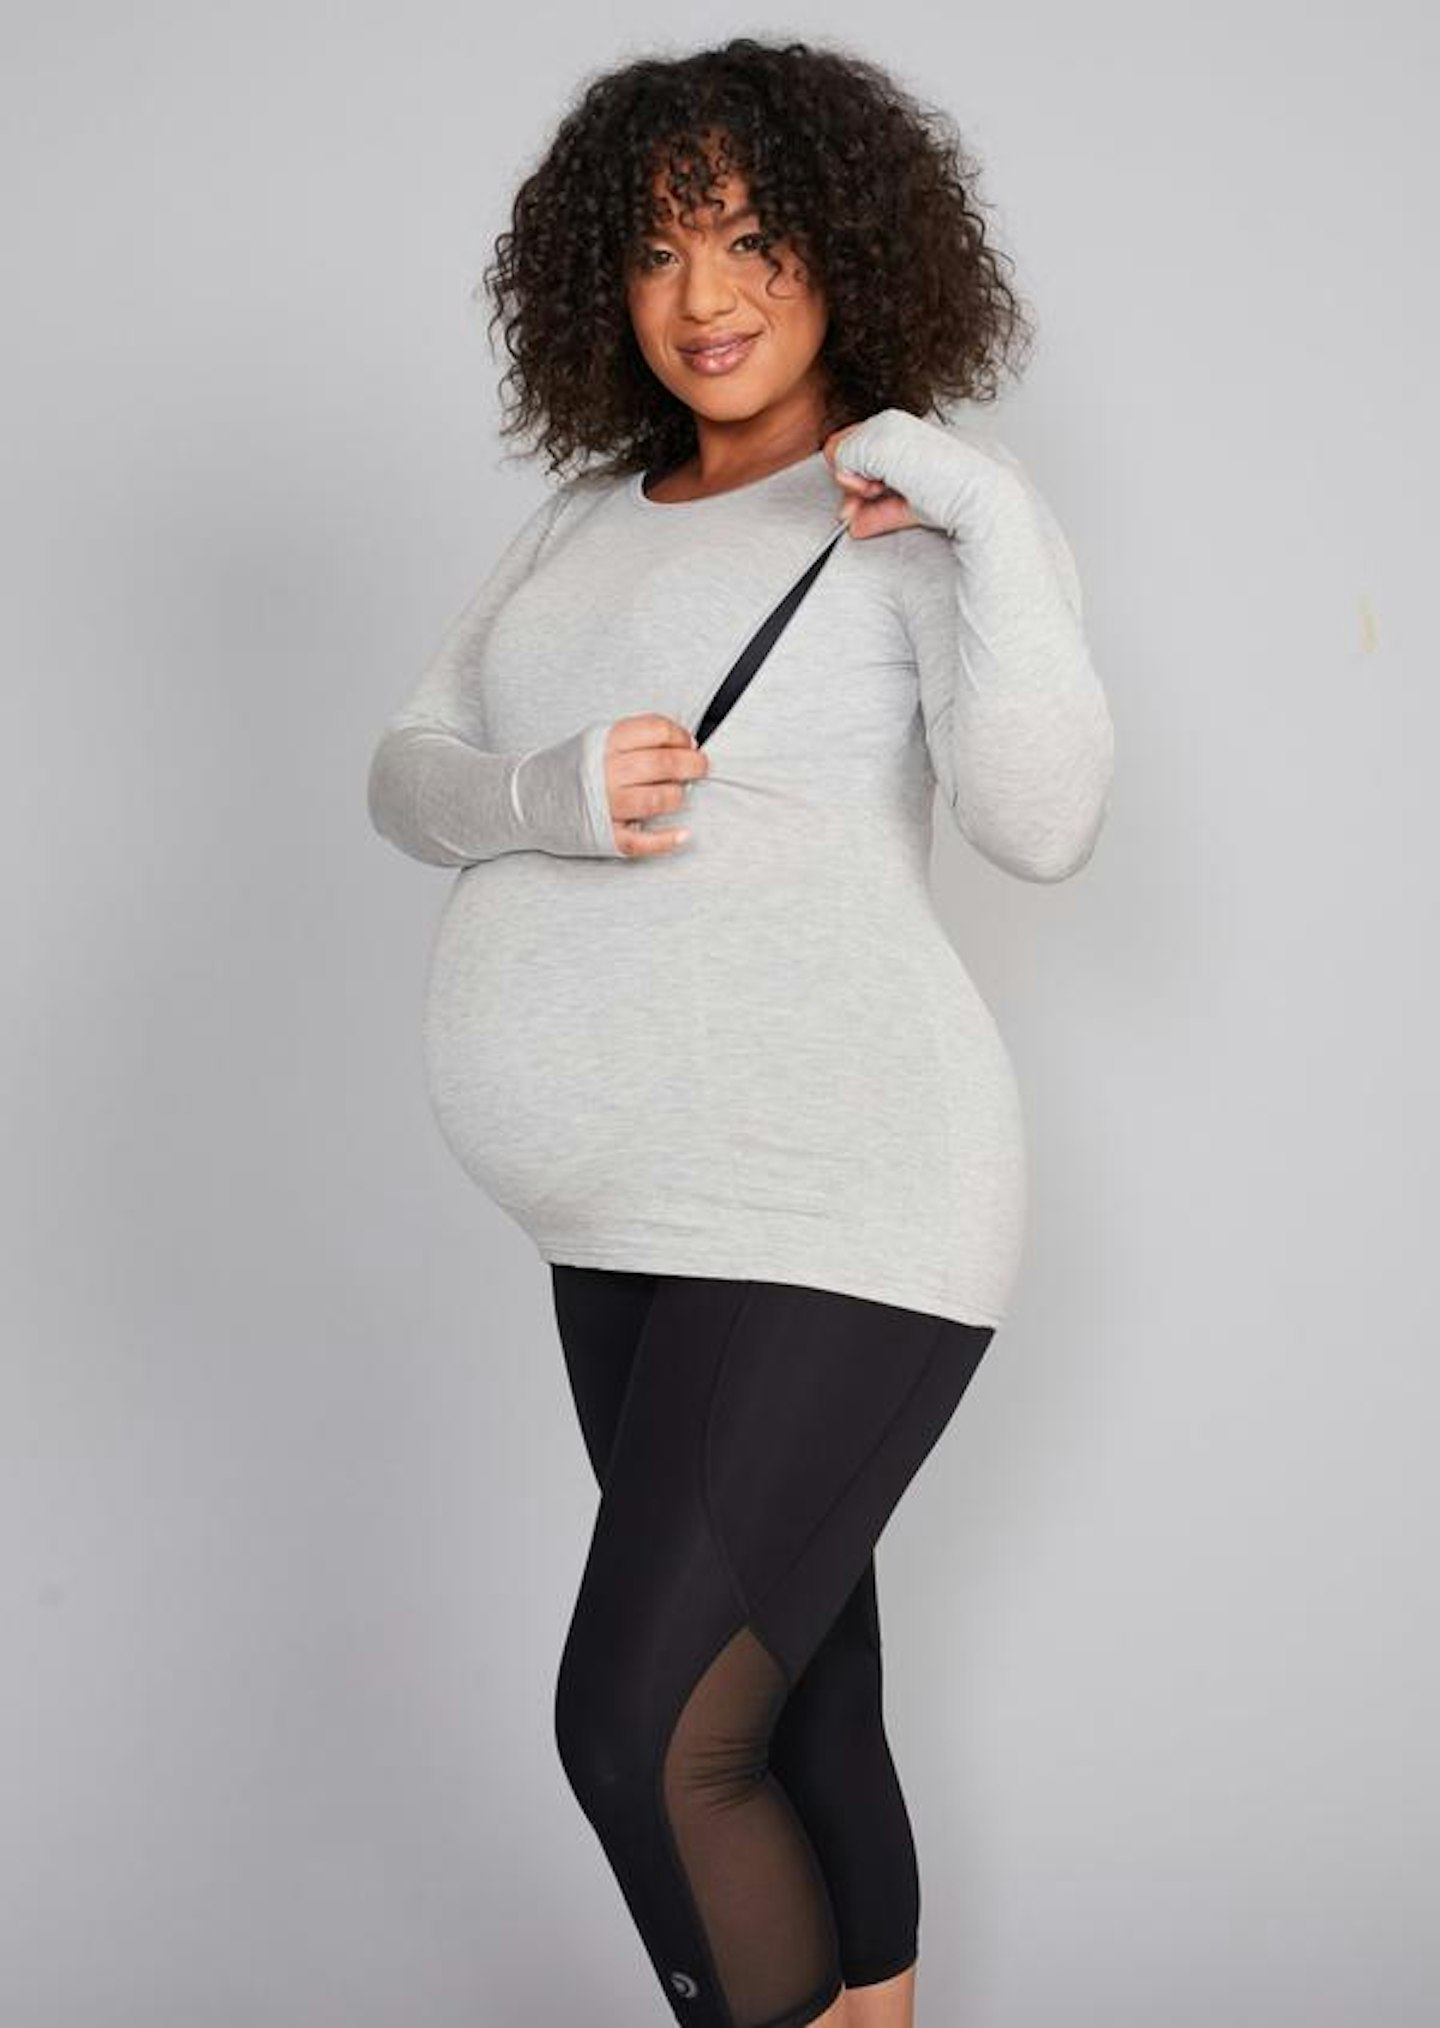 Shop The Best And Most Stylish Breastfeeding Tops UK 2023